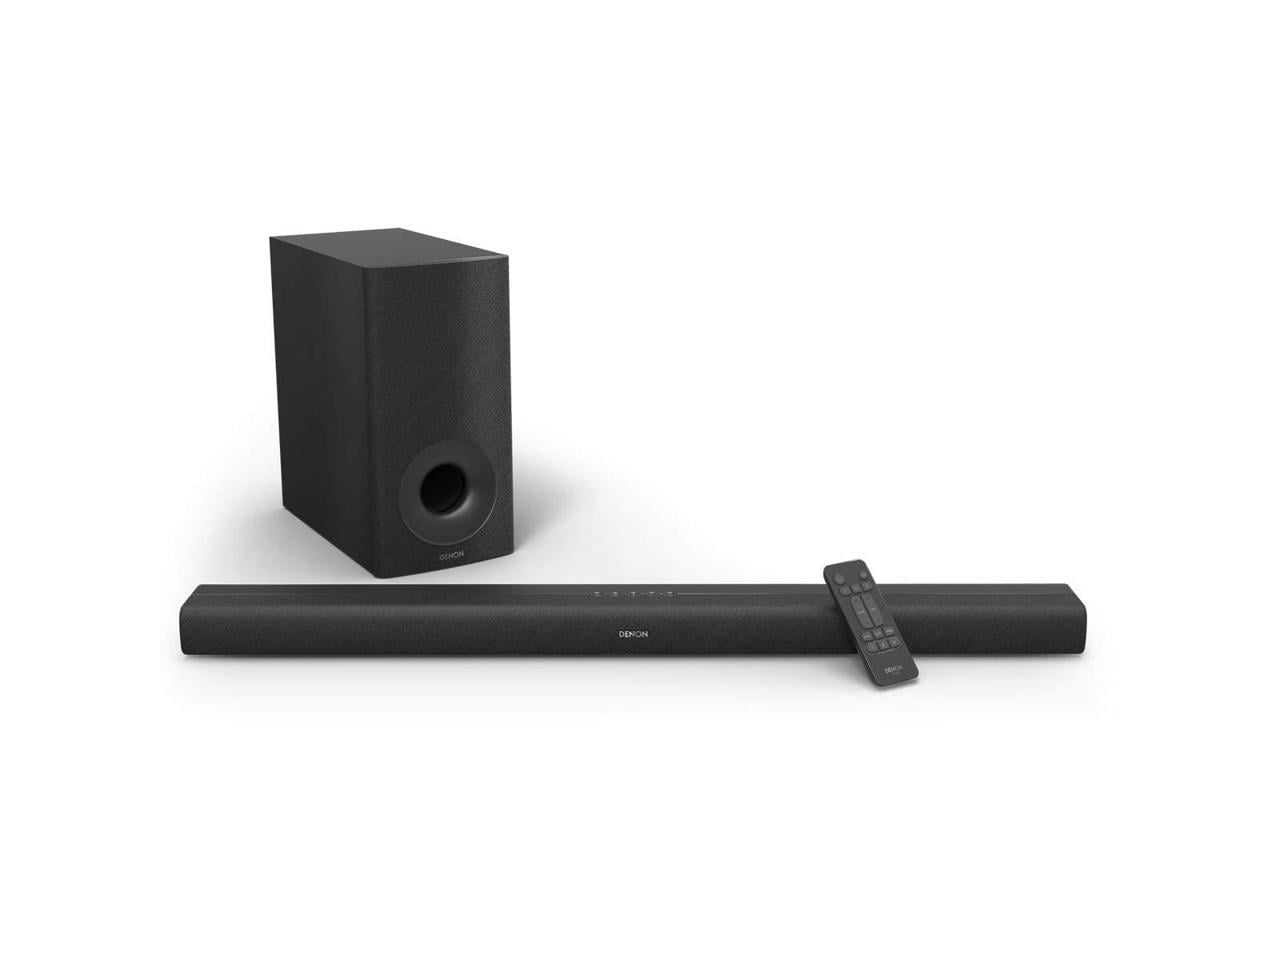 Denon - DHT-S316 Slim Home Theater Sound Bar with Wireless Subwoofer |  Virtual Surround Sound | HDMI ARC | Wall Mountable - Black